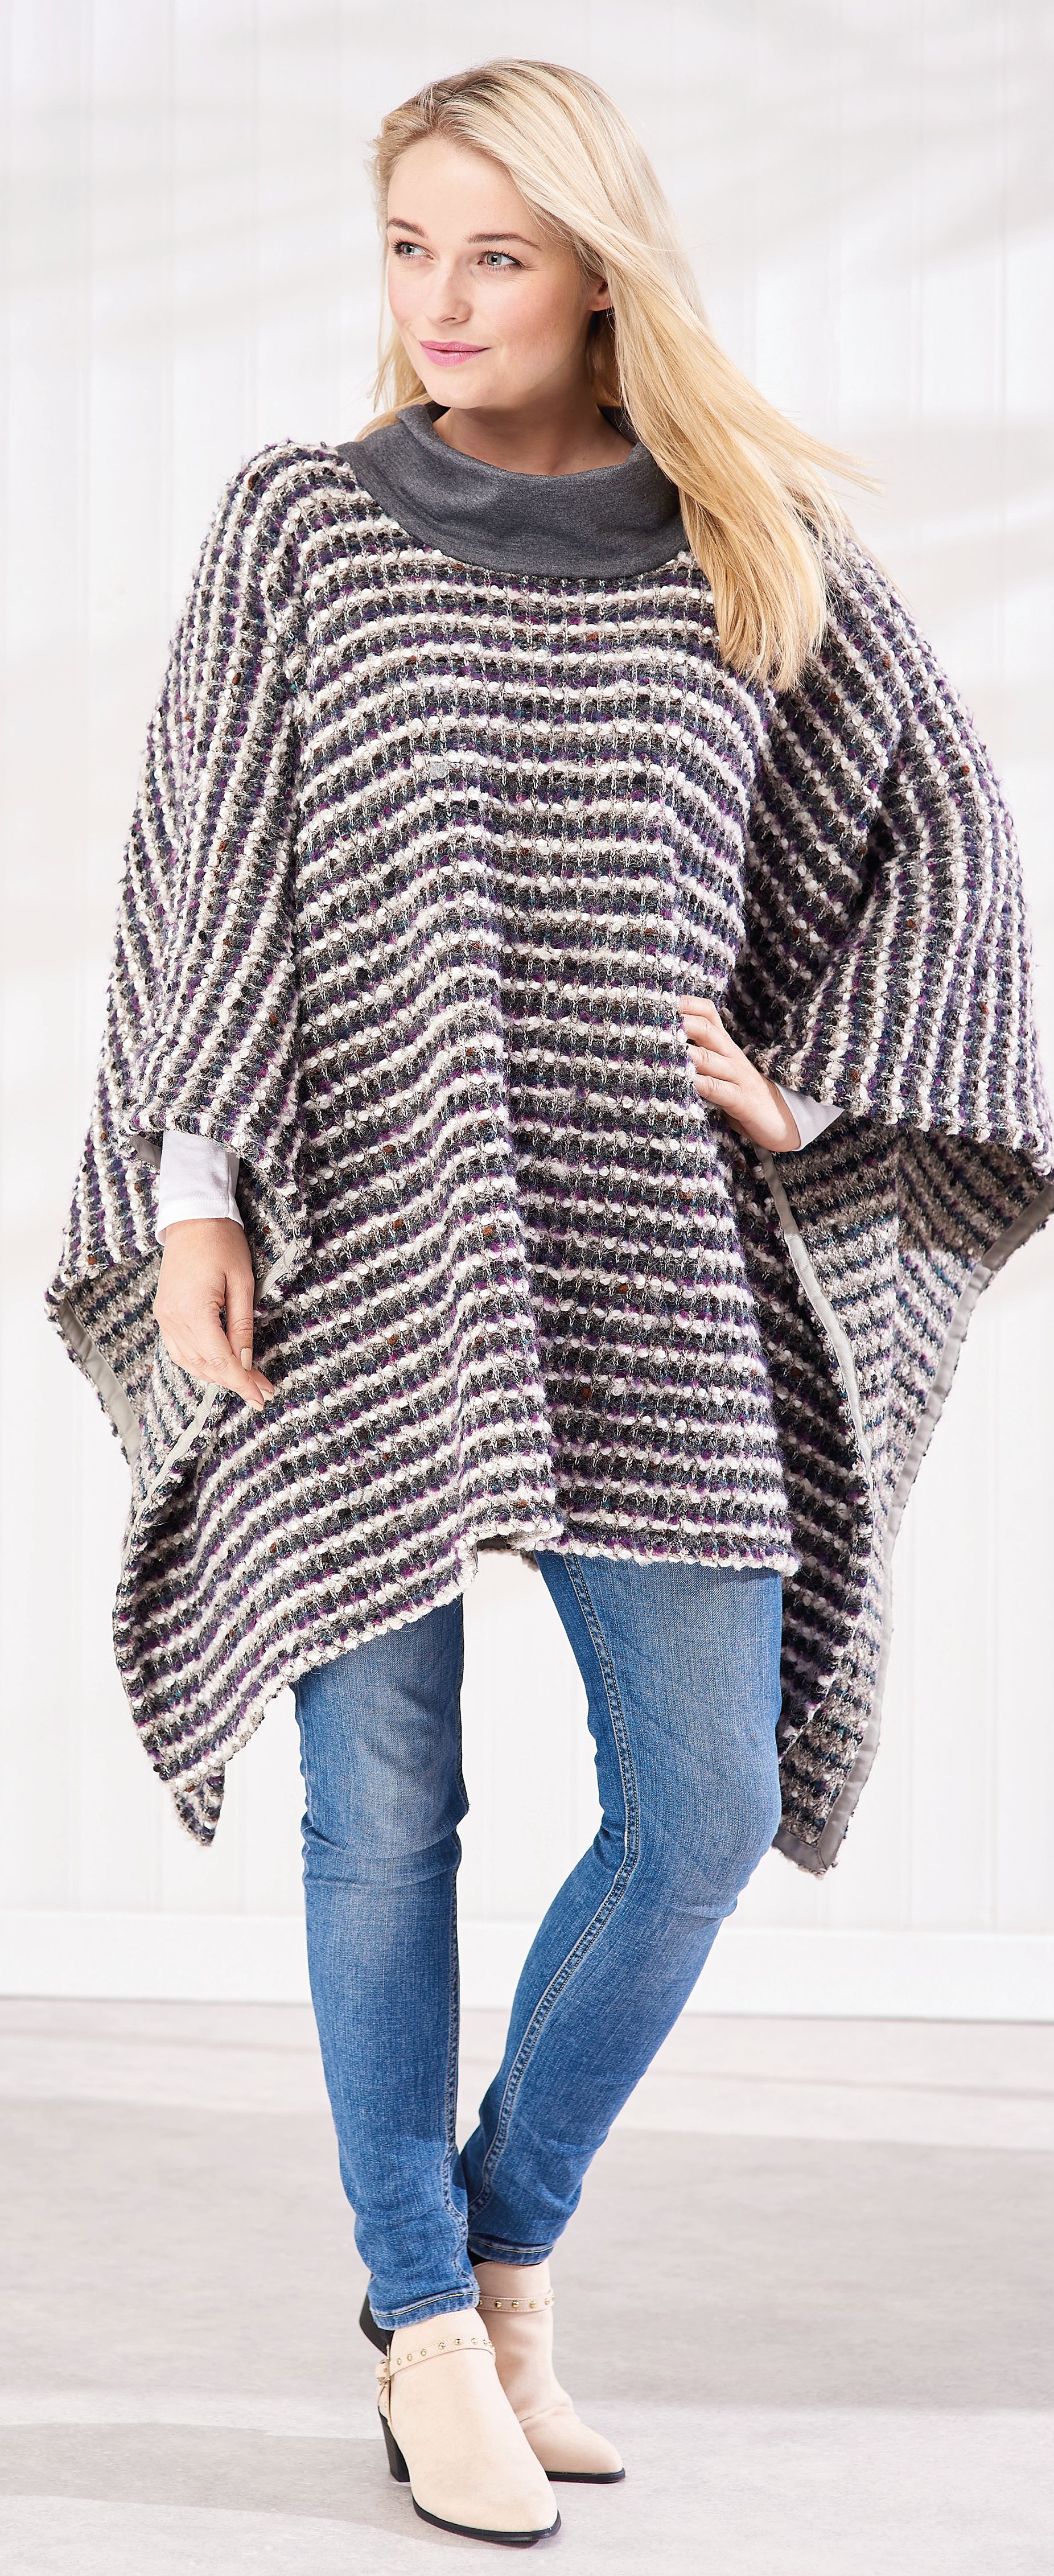 32+ Designs Open Front Poncho Sewing Pattern - ShirelleJaymee